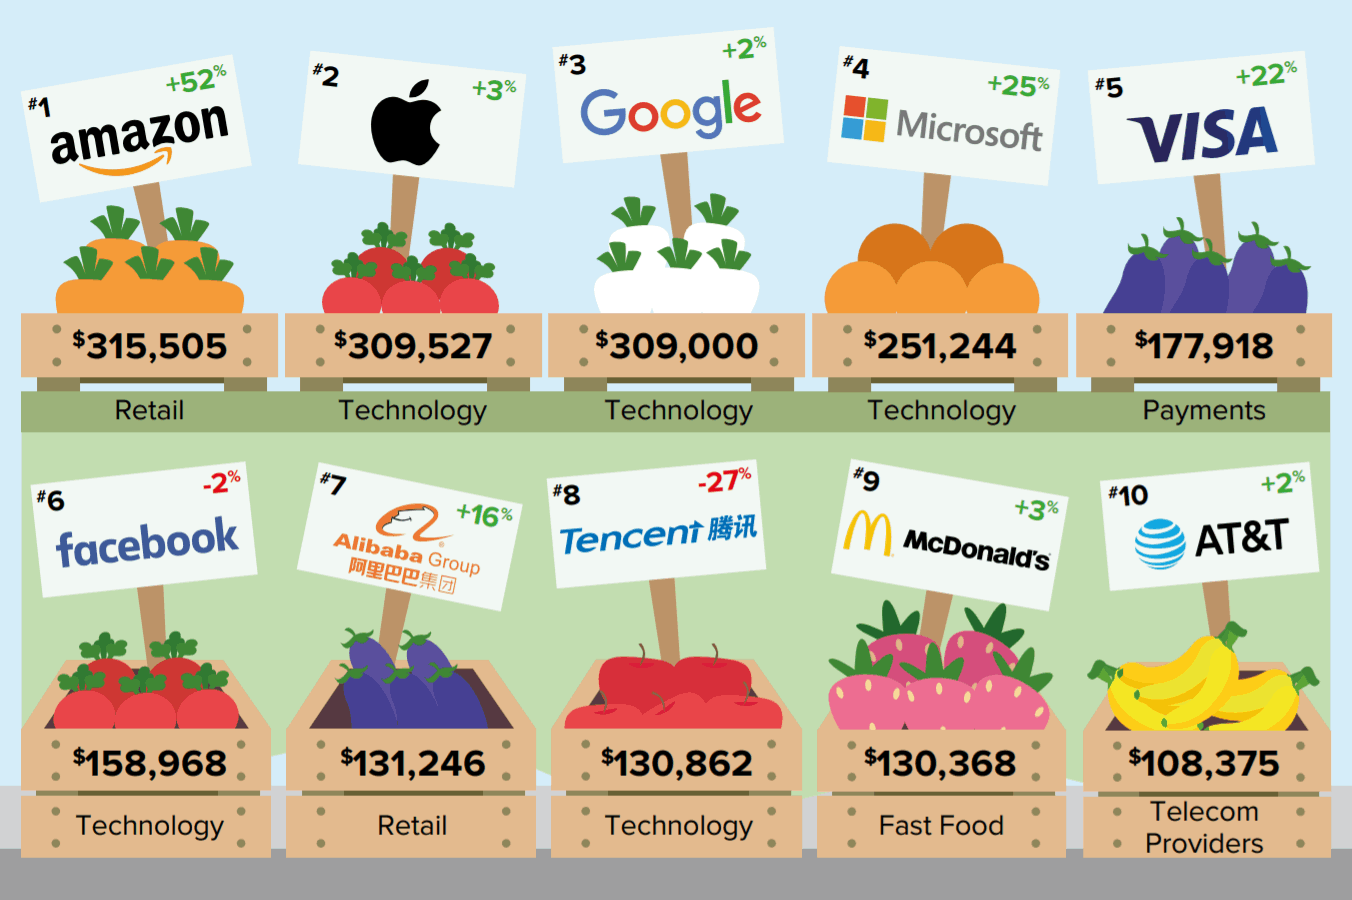 Amazon beats Apple and Google to become the world's most valuable brand in 2019